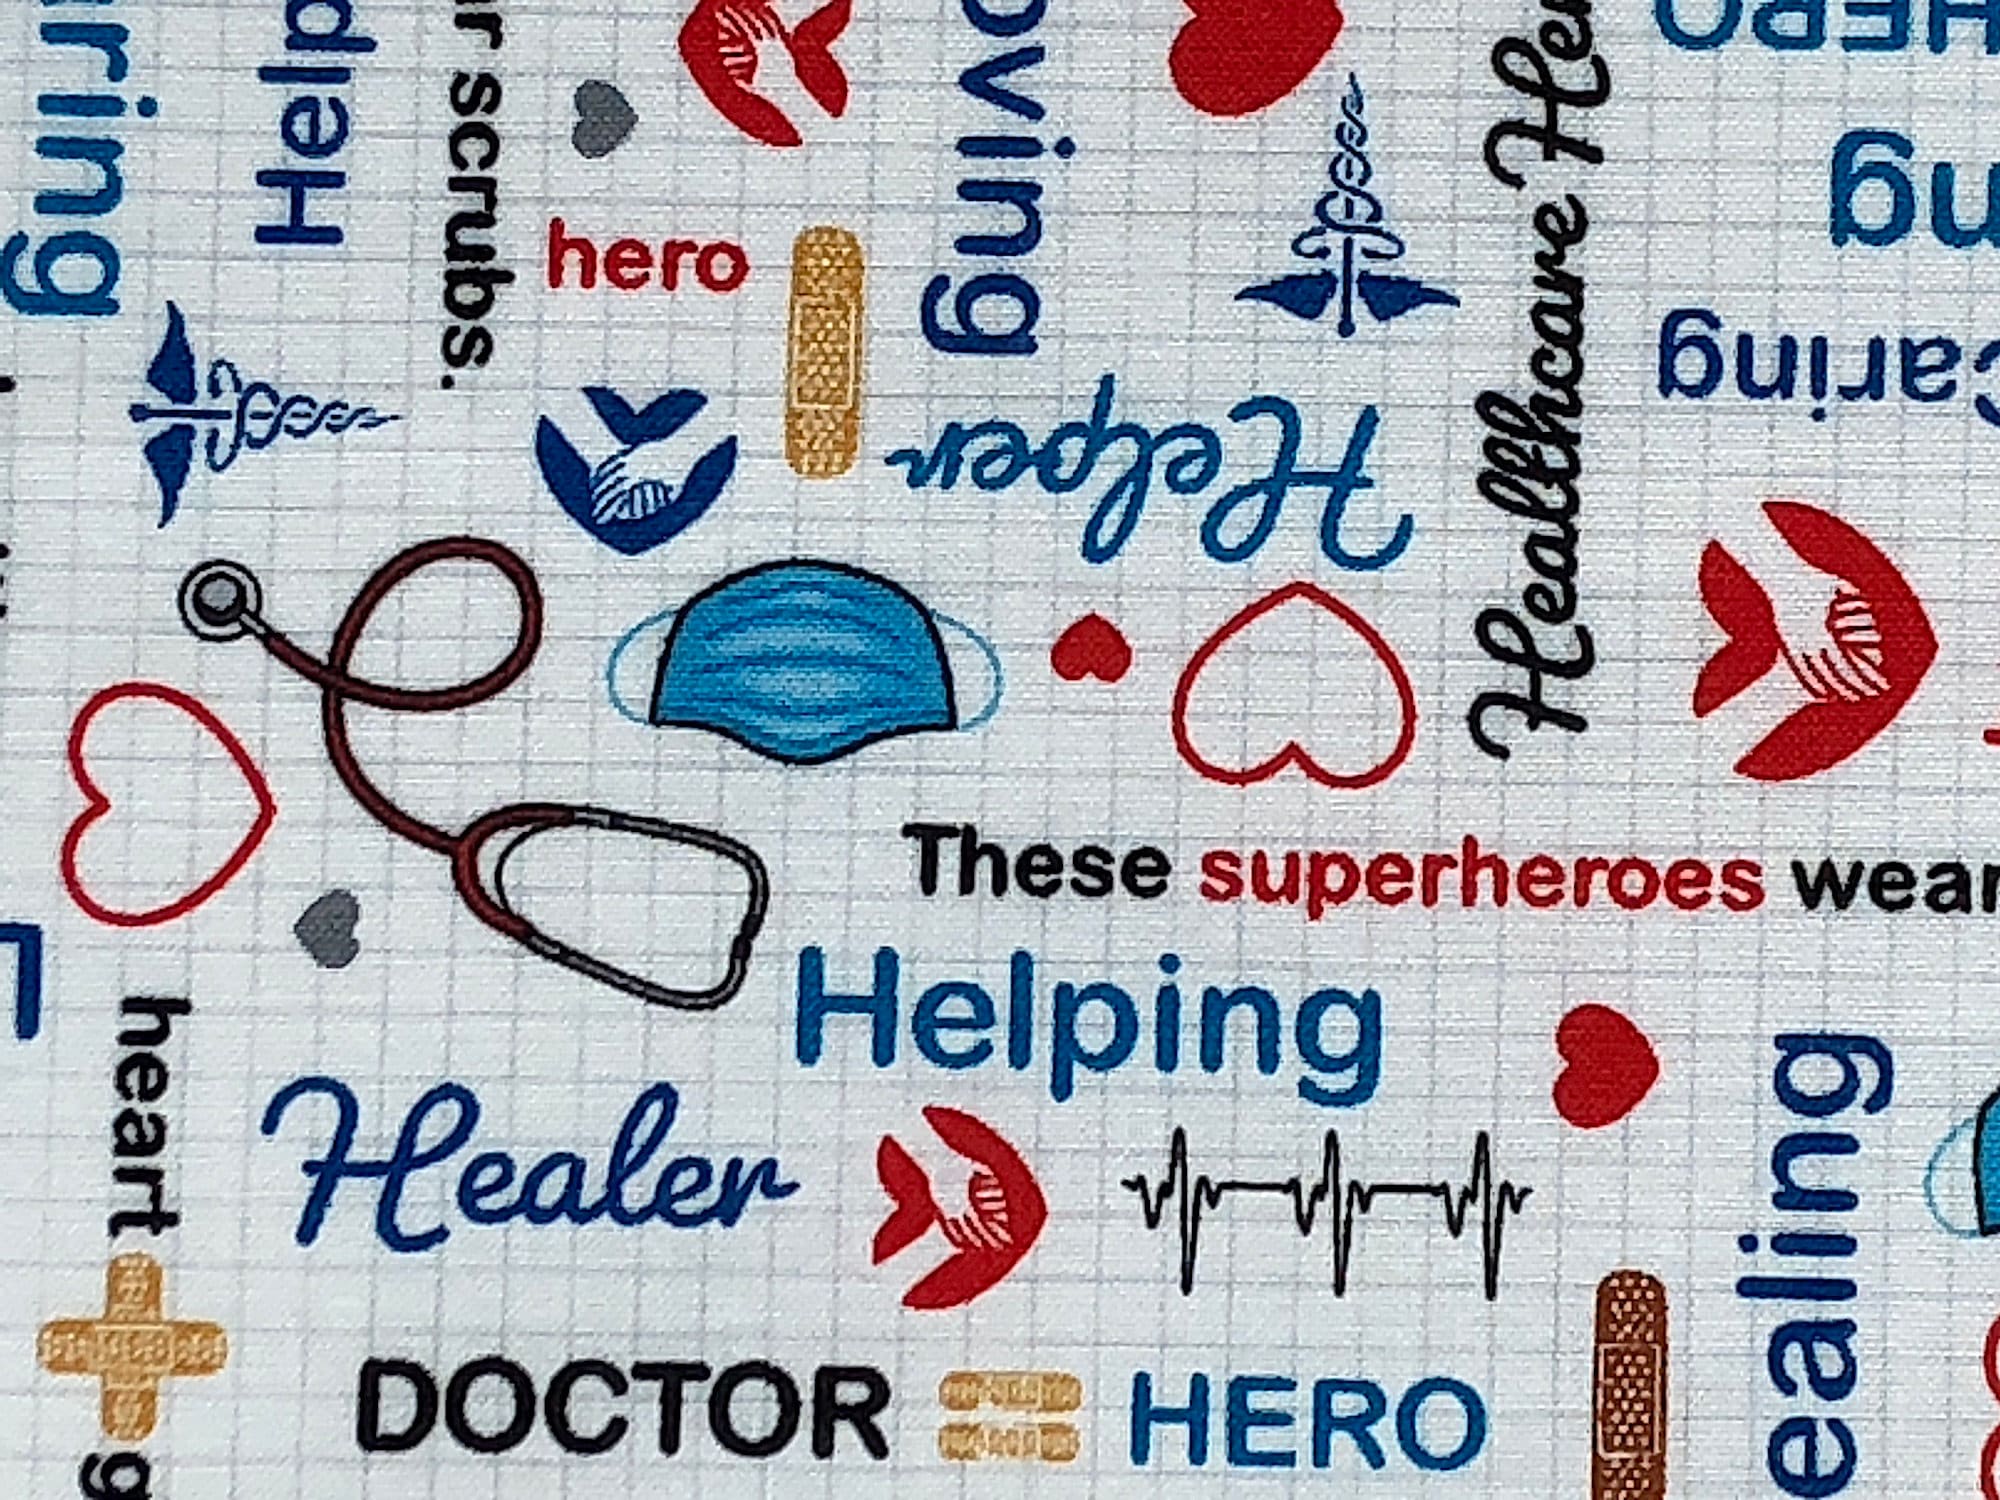 Close up of face masks, stethoscopes, words such as helping, healer, doctor, hero and more.